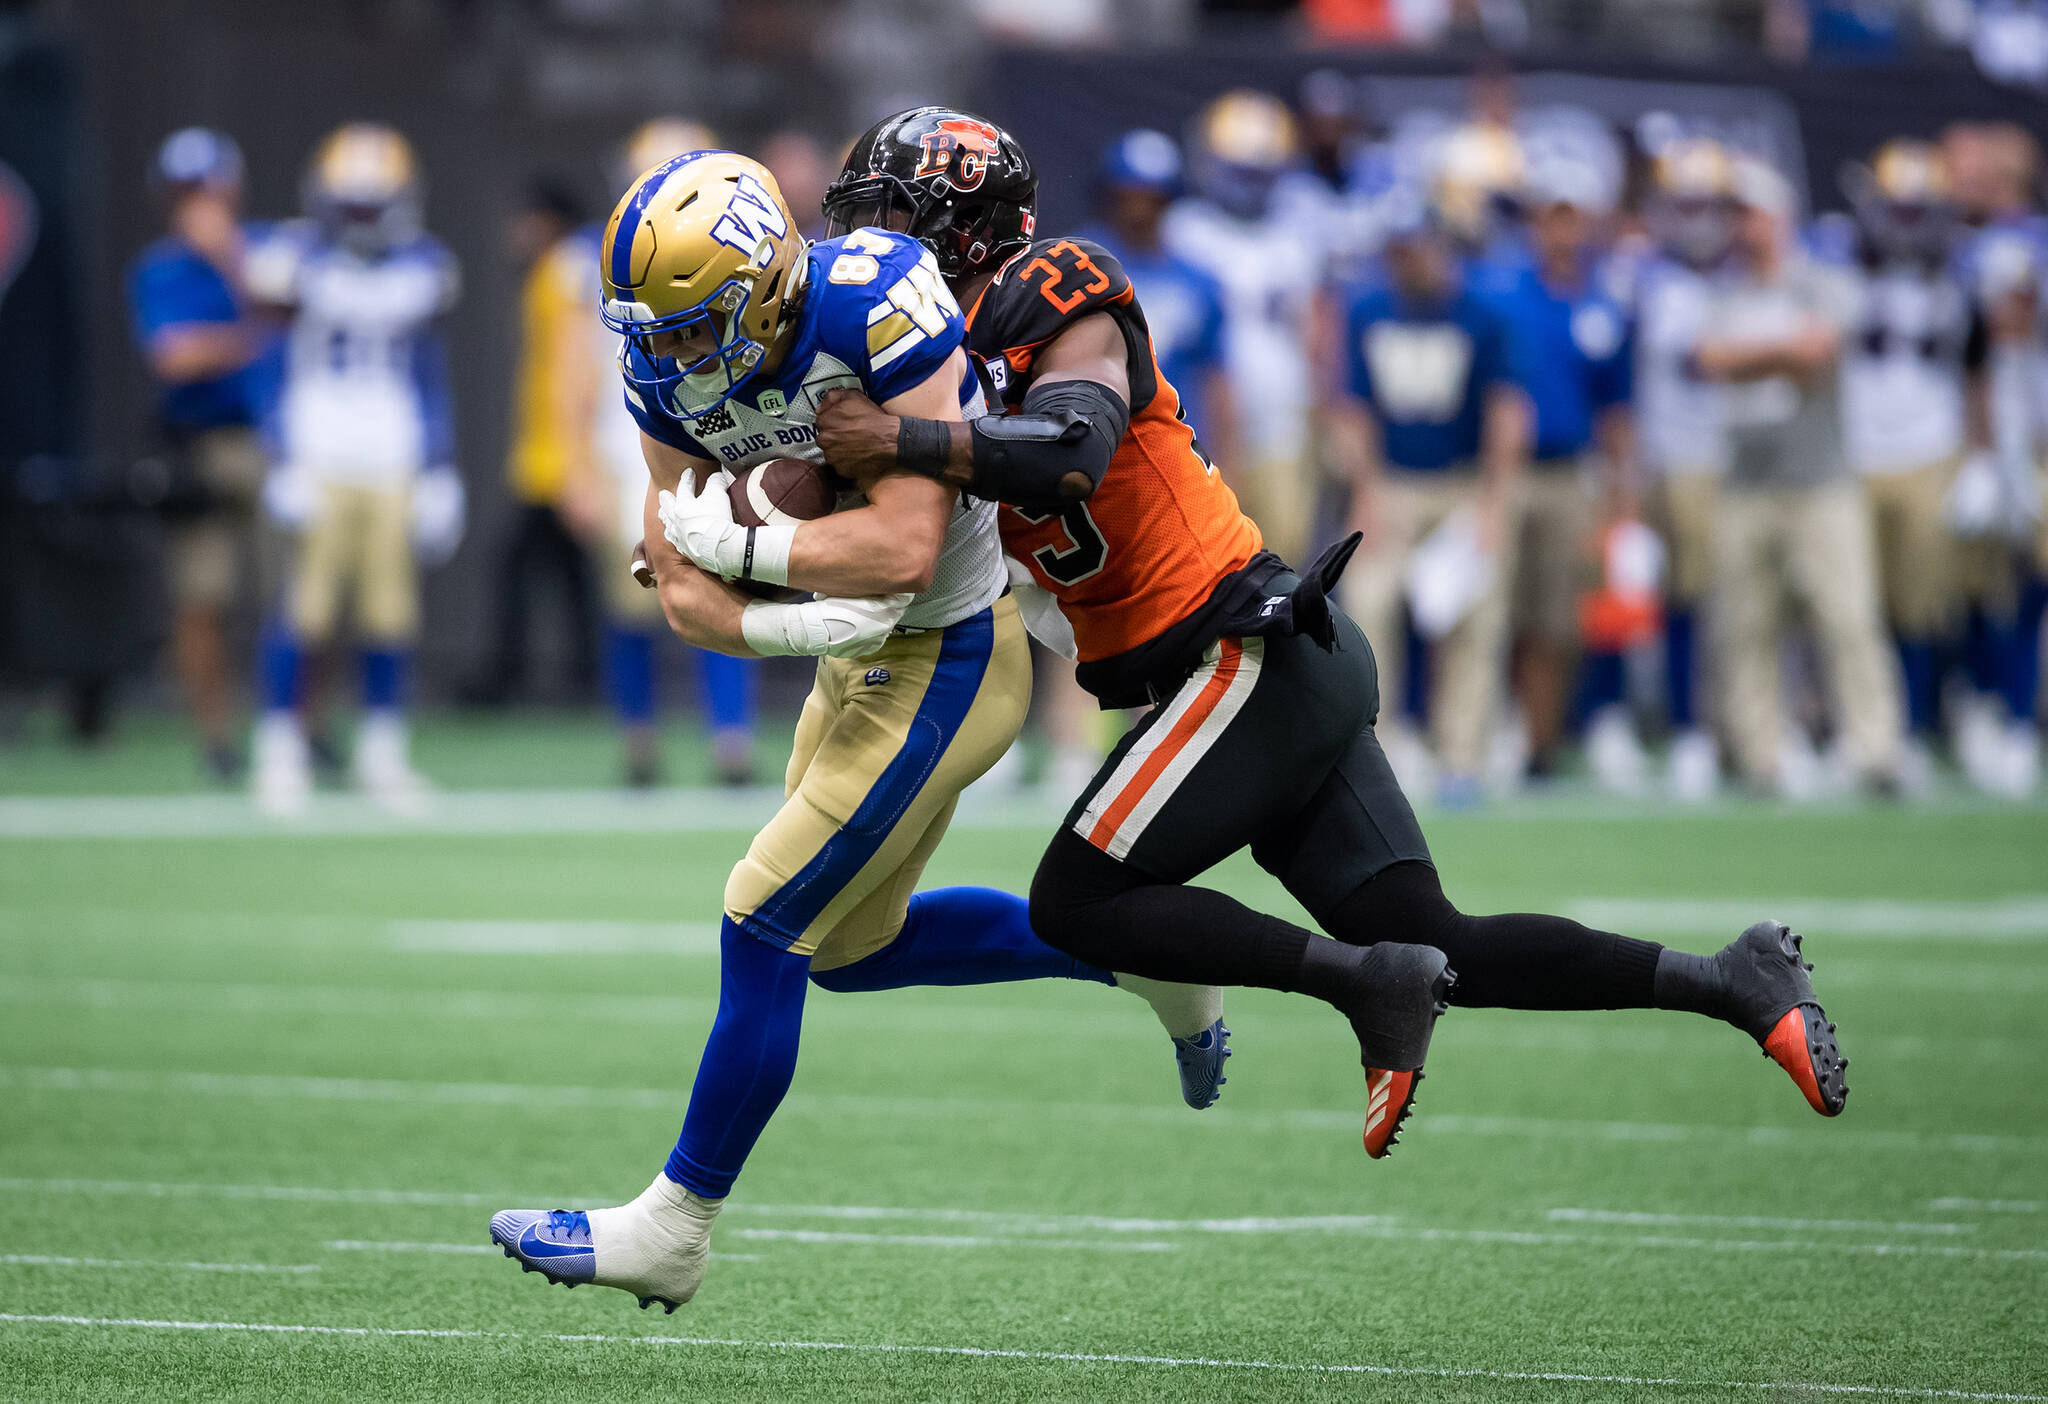 Winnipeg Blue Bombers' Dalton Schoen (83) is tackled by B.C. Lions' Delvin Breaux Sr. (23) after making a reception during the second half of CFL football game in Vancouver, on Saturday, July 9, 2022. THE CANADIAN PRESS/Darryl Dyck